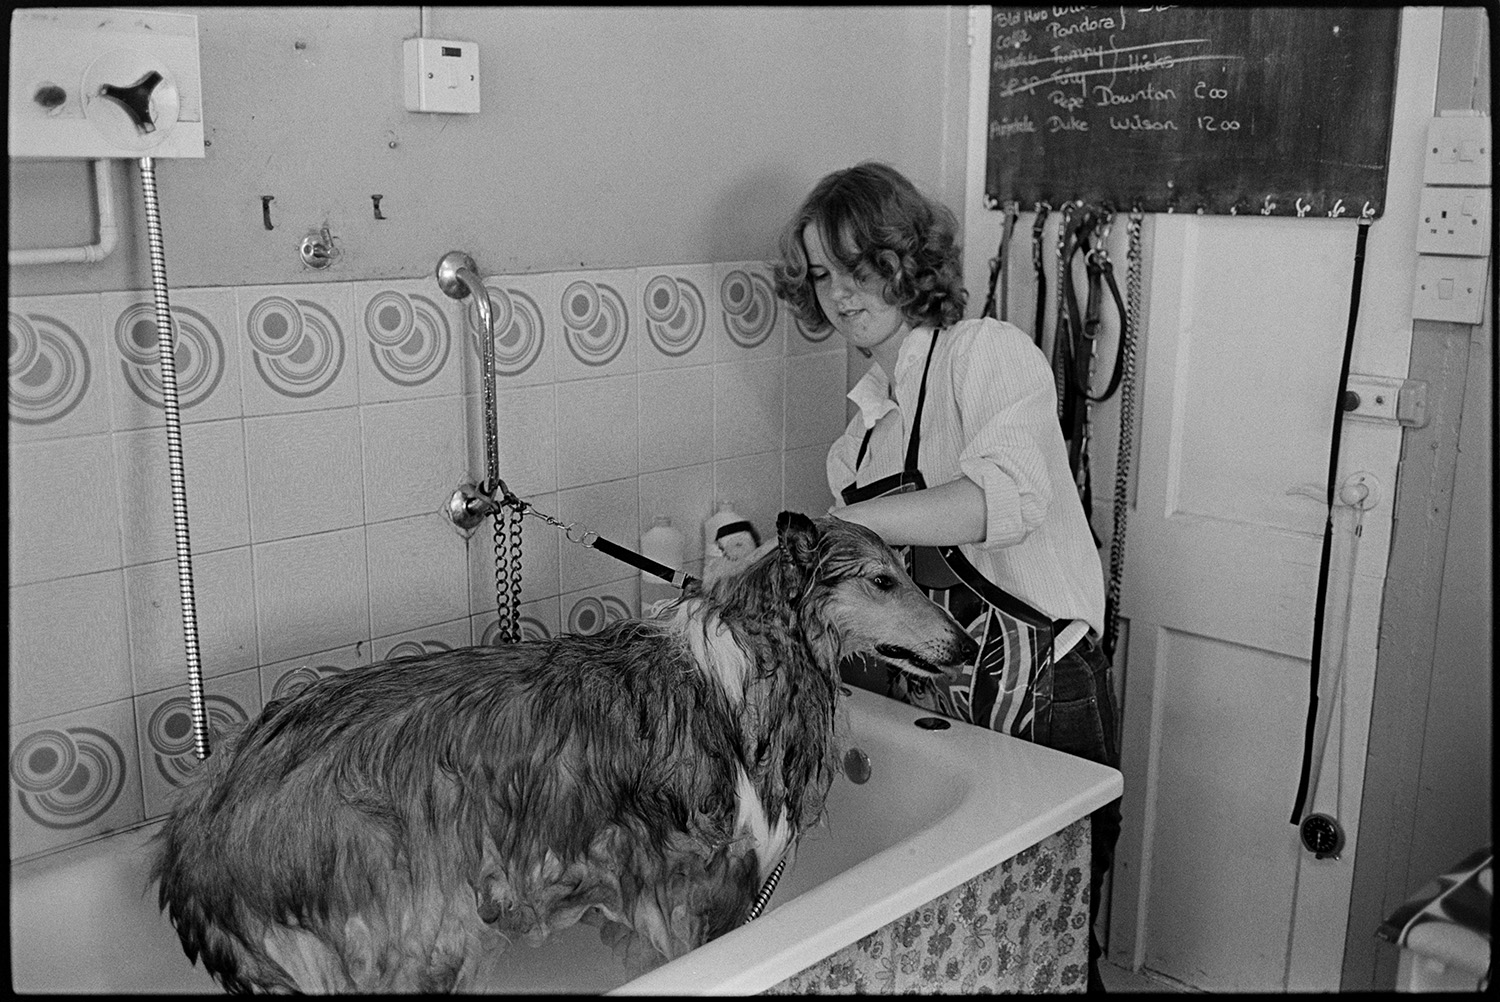 Women shampooing dogs in pet parlour, dogs with hair dryers. 
[A woman shampooing or washing a dog in a bath at 'Bonny Pets' pets parlour at East the Water, Bideford. Leads are hung up on the wall behind her.]